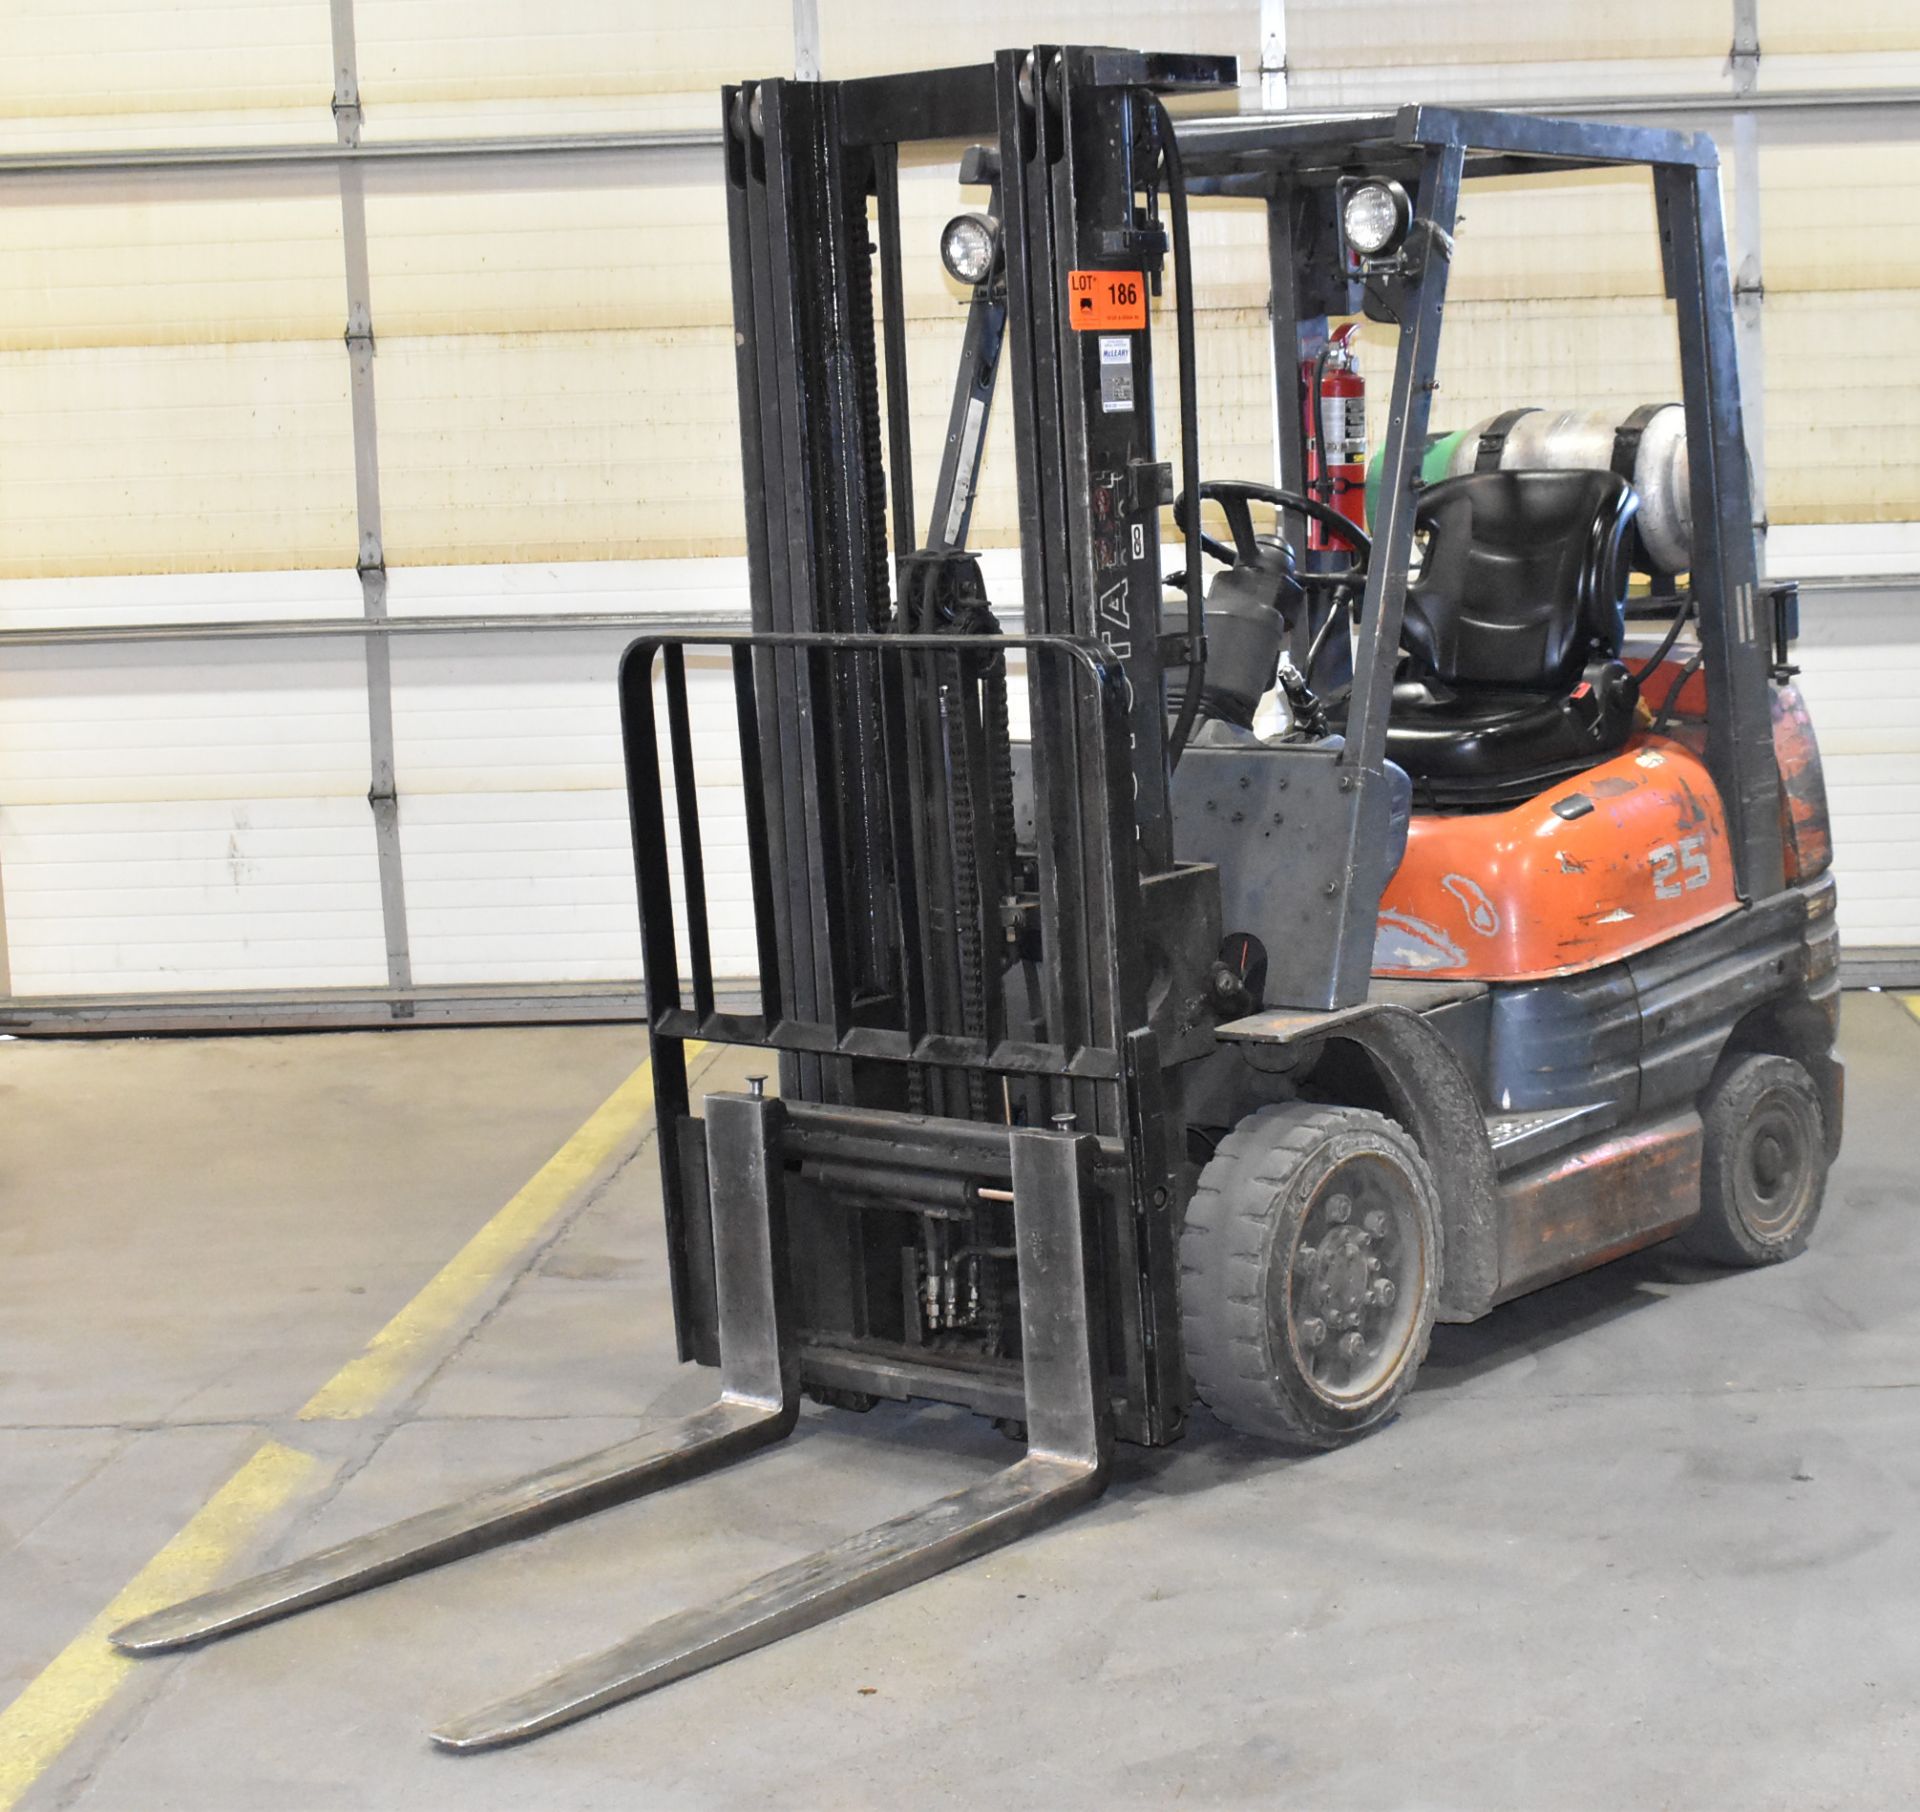 TOYOTA 42-6FGCU25 4,900 LB. CAPACITY LPG FORKLIFT WITH 189" MAX. LIFT HEIGHT, 3-STAGE MAST, SIDE